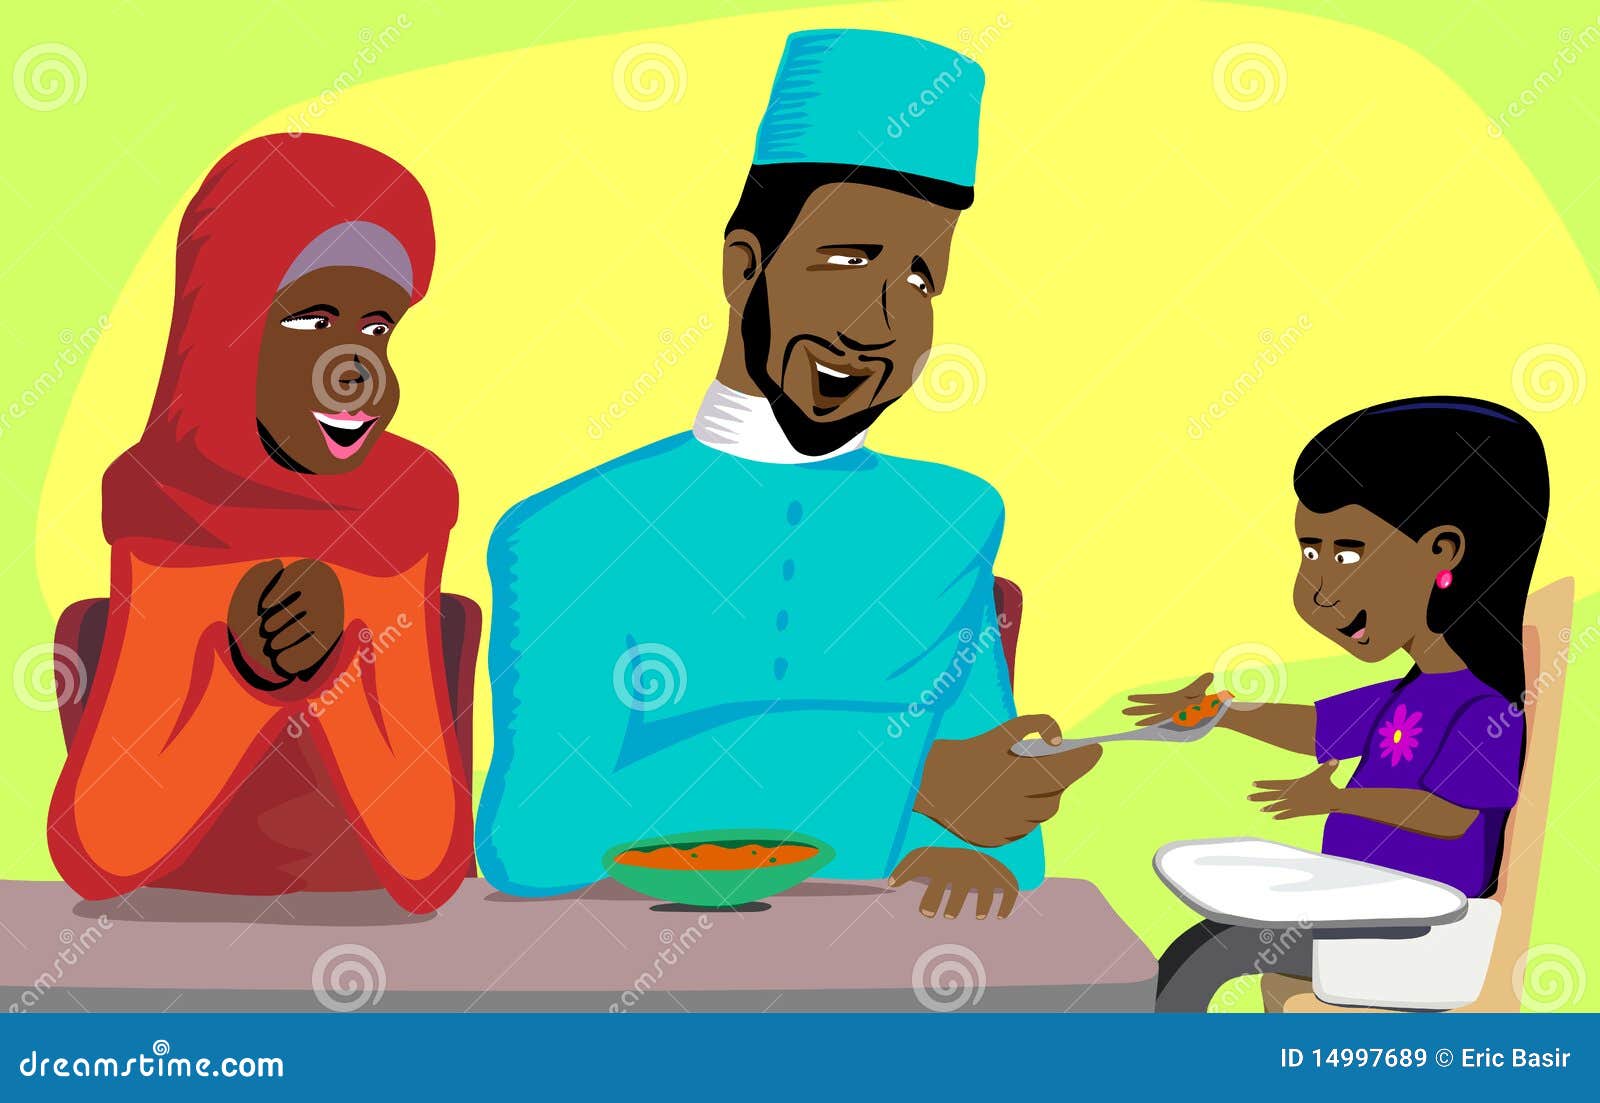 Muslim Family Snack Time stock vector. Illustration of american - 14997689